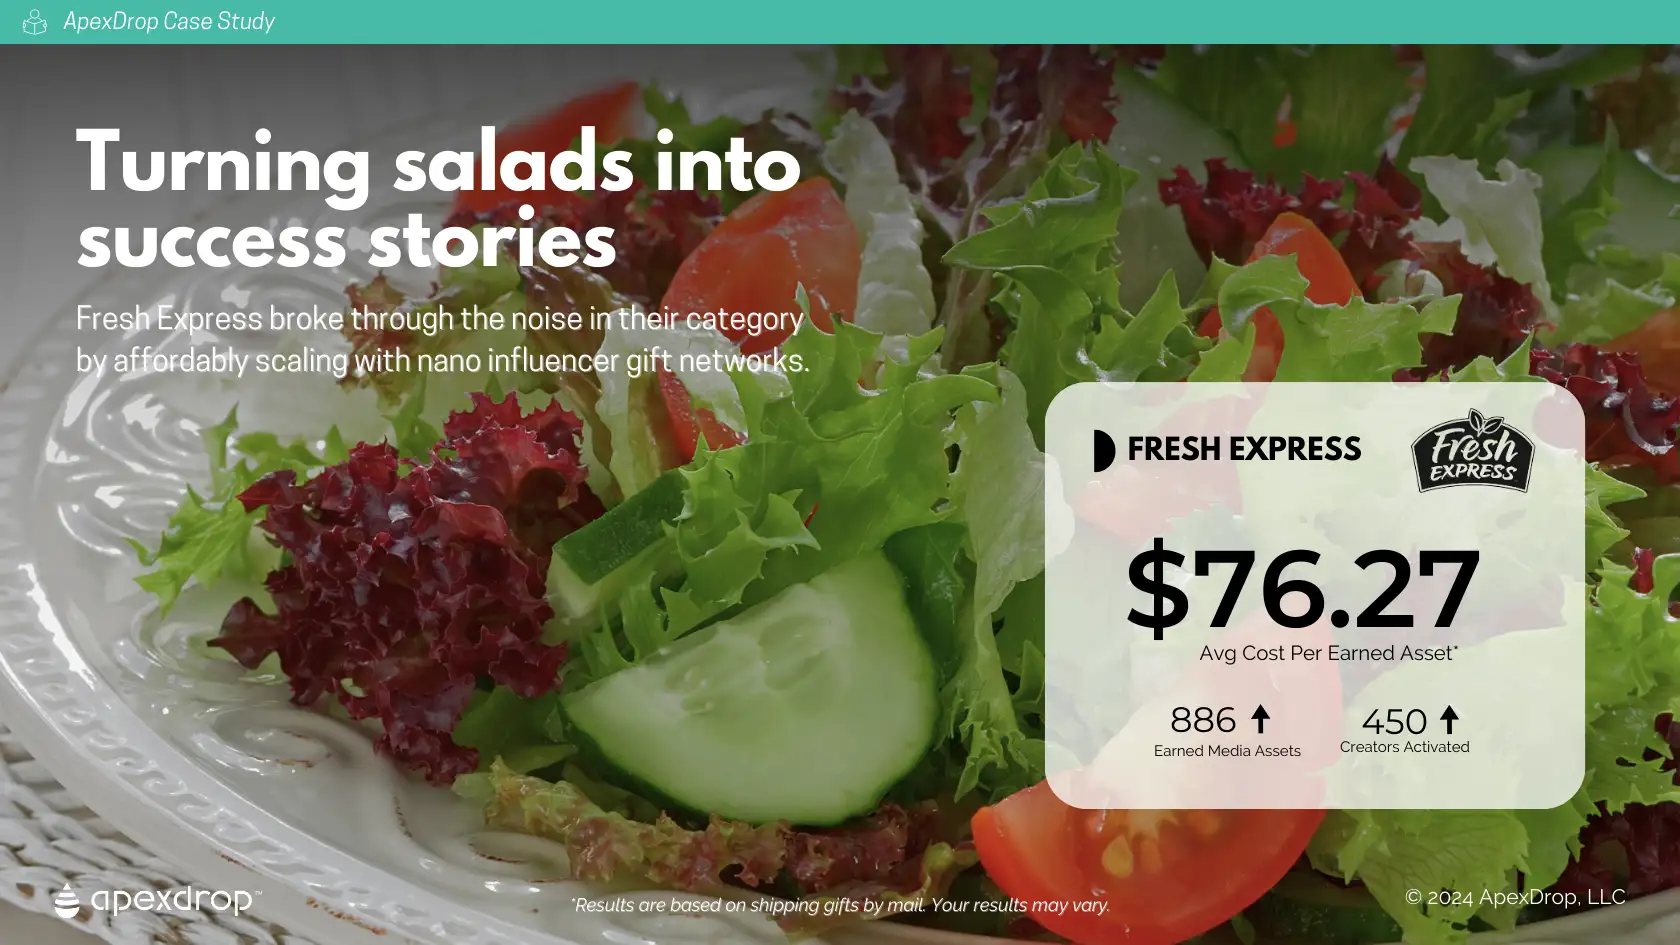 Turning Salads Into Success Stories - Fresh Express broke through the noise in their category by affordably scaling with nano influencer gift networks.